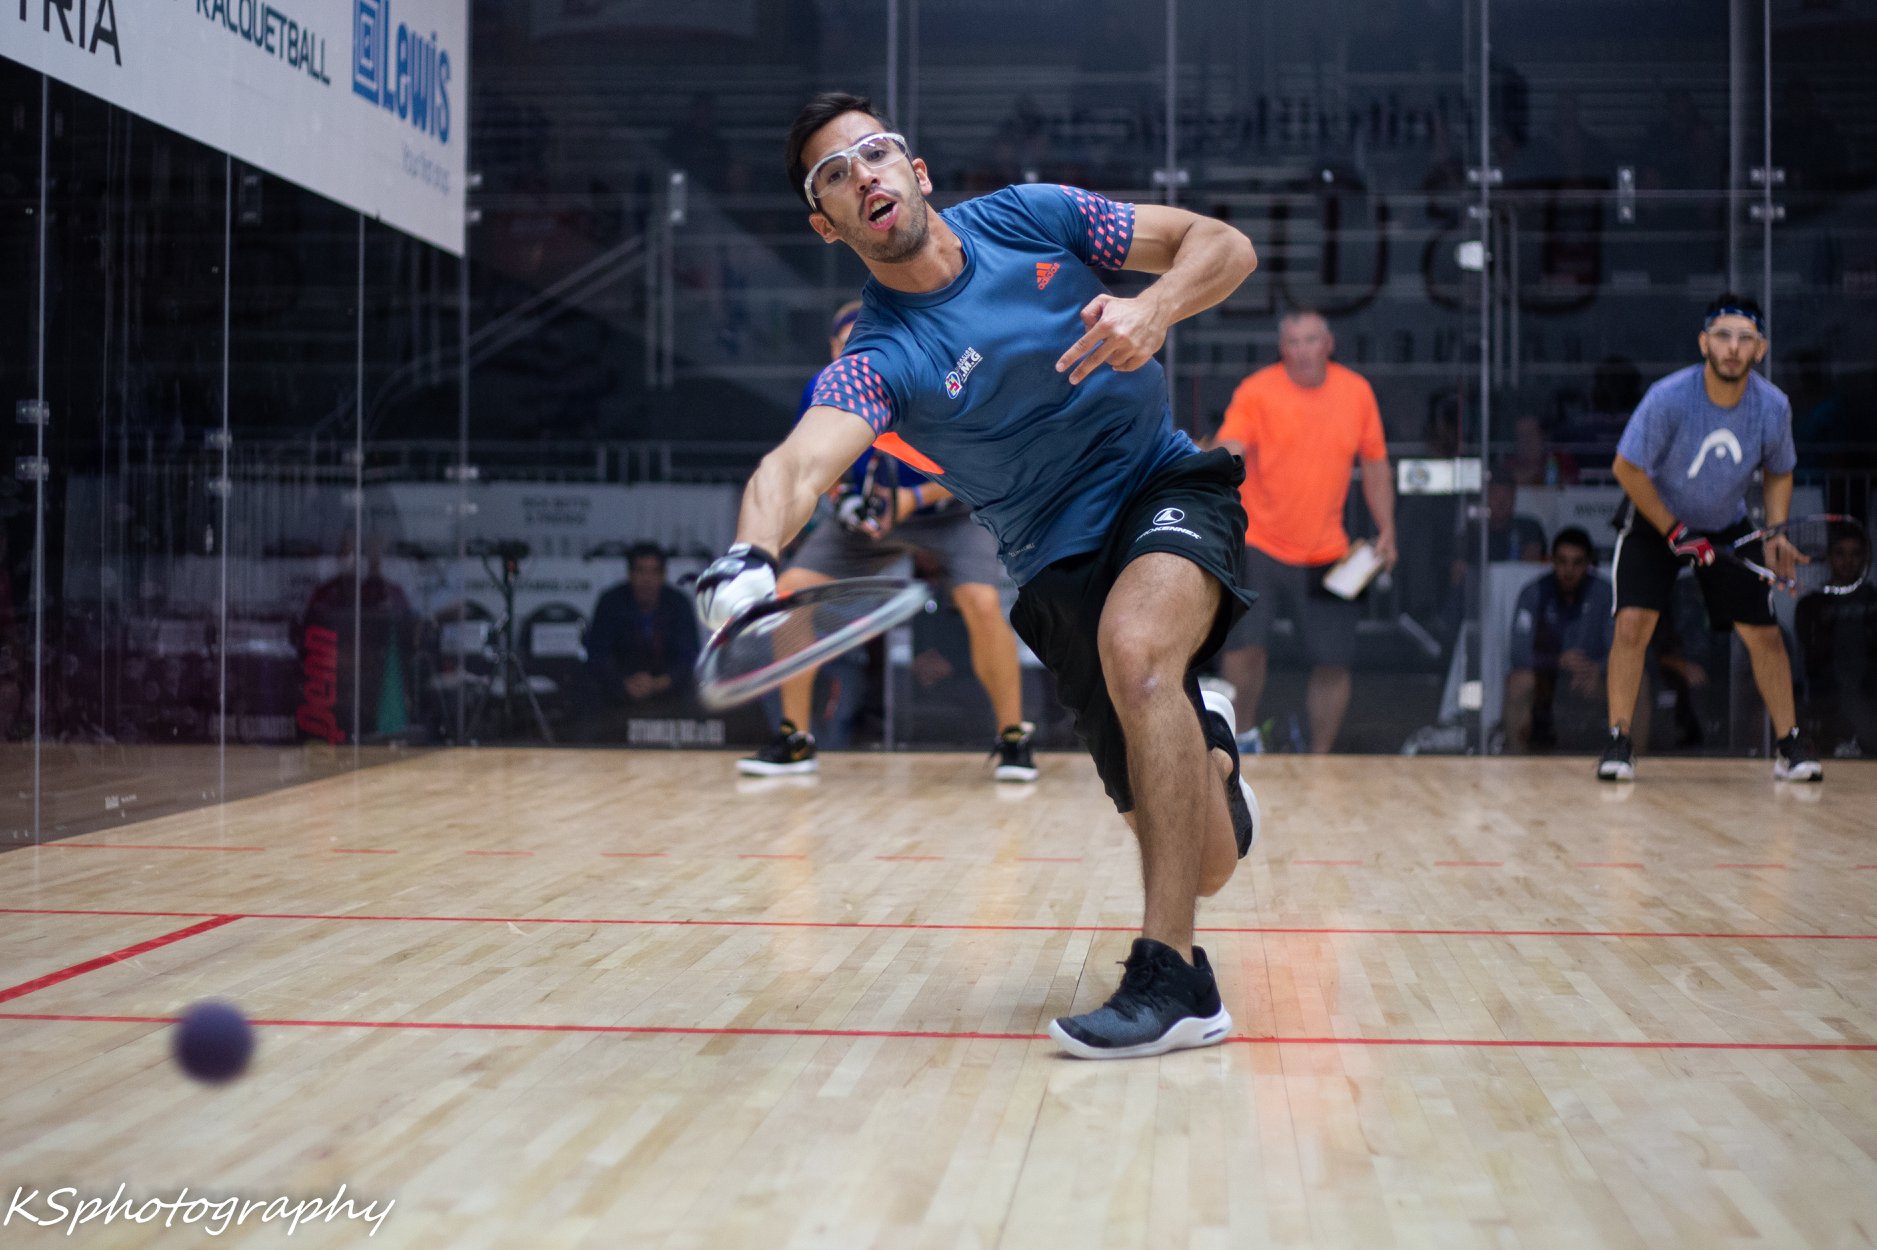 US Open 2019, Photographer Kevin Savory